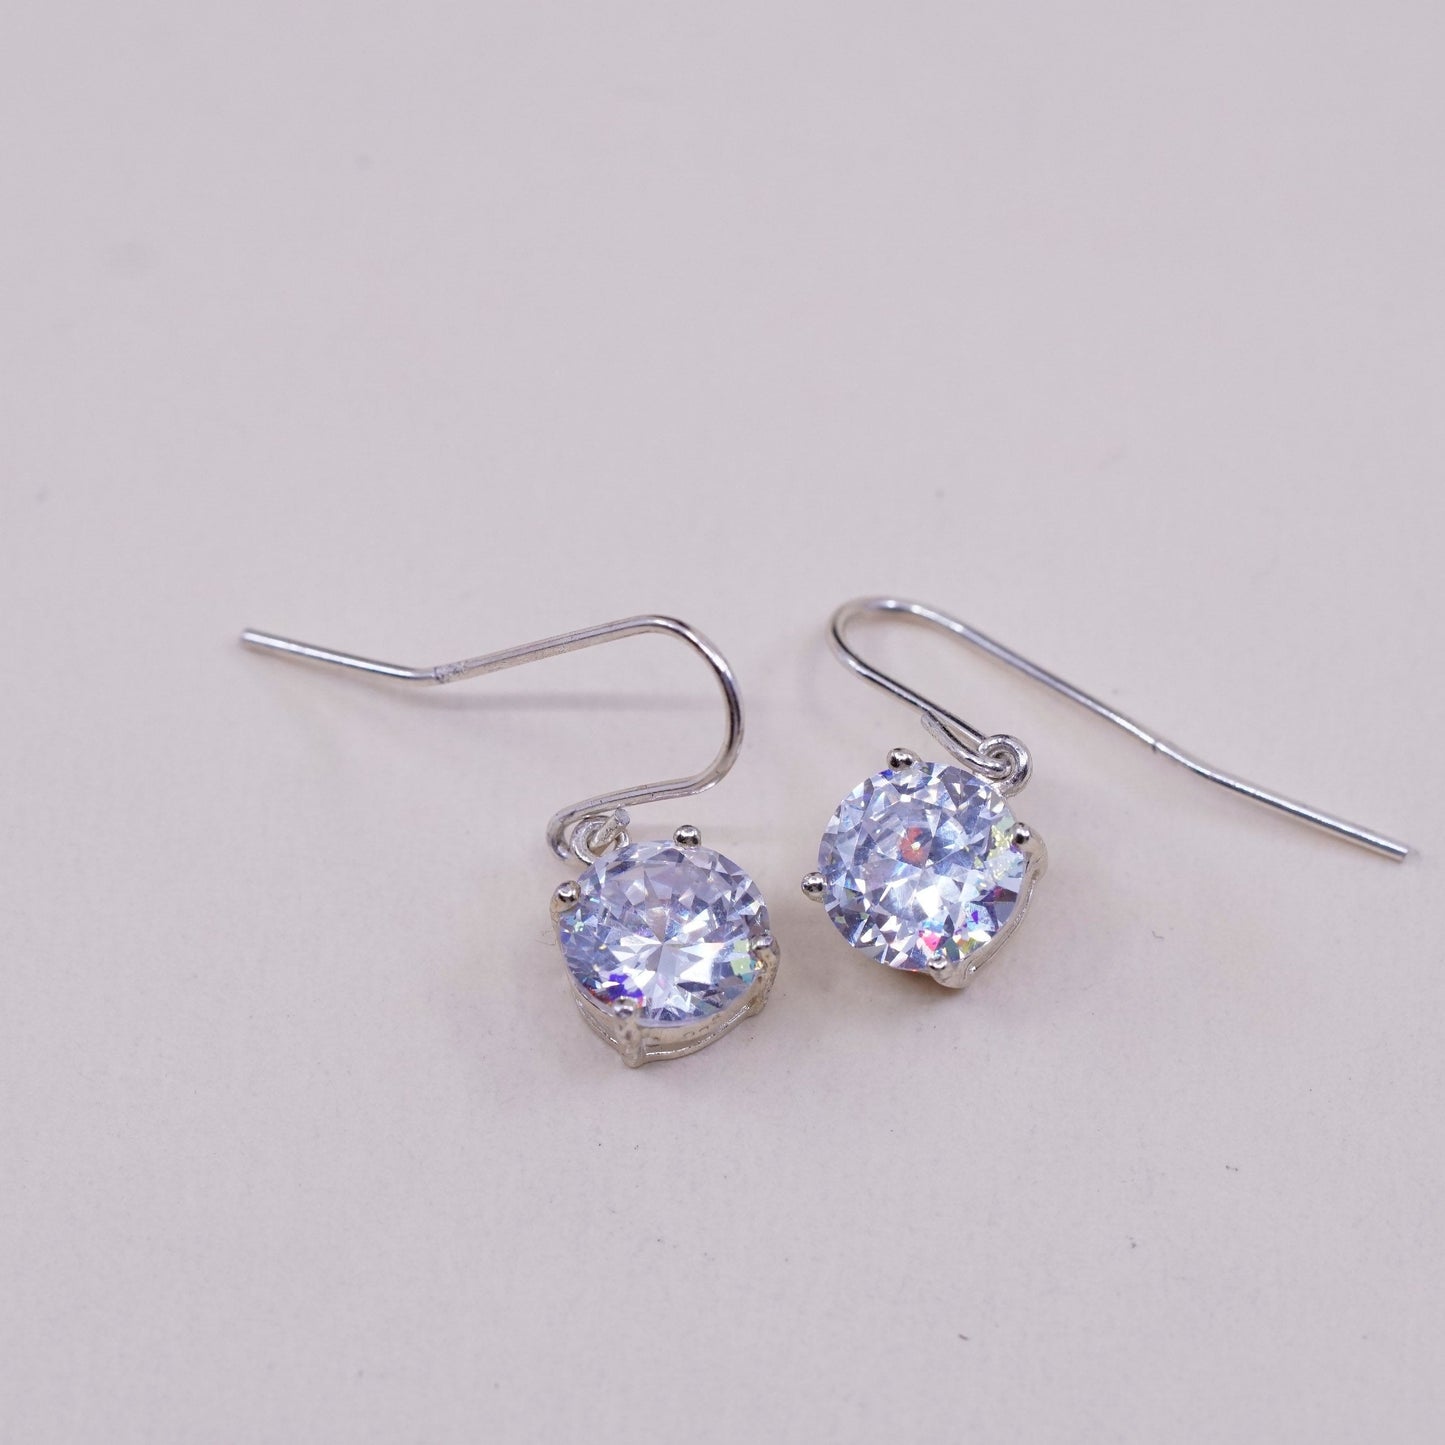 Vintage sterling silver handmade earrings, 925 silver with round CZ